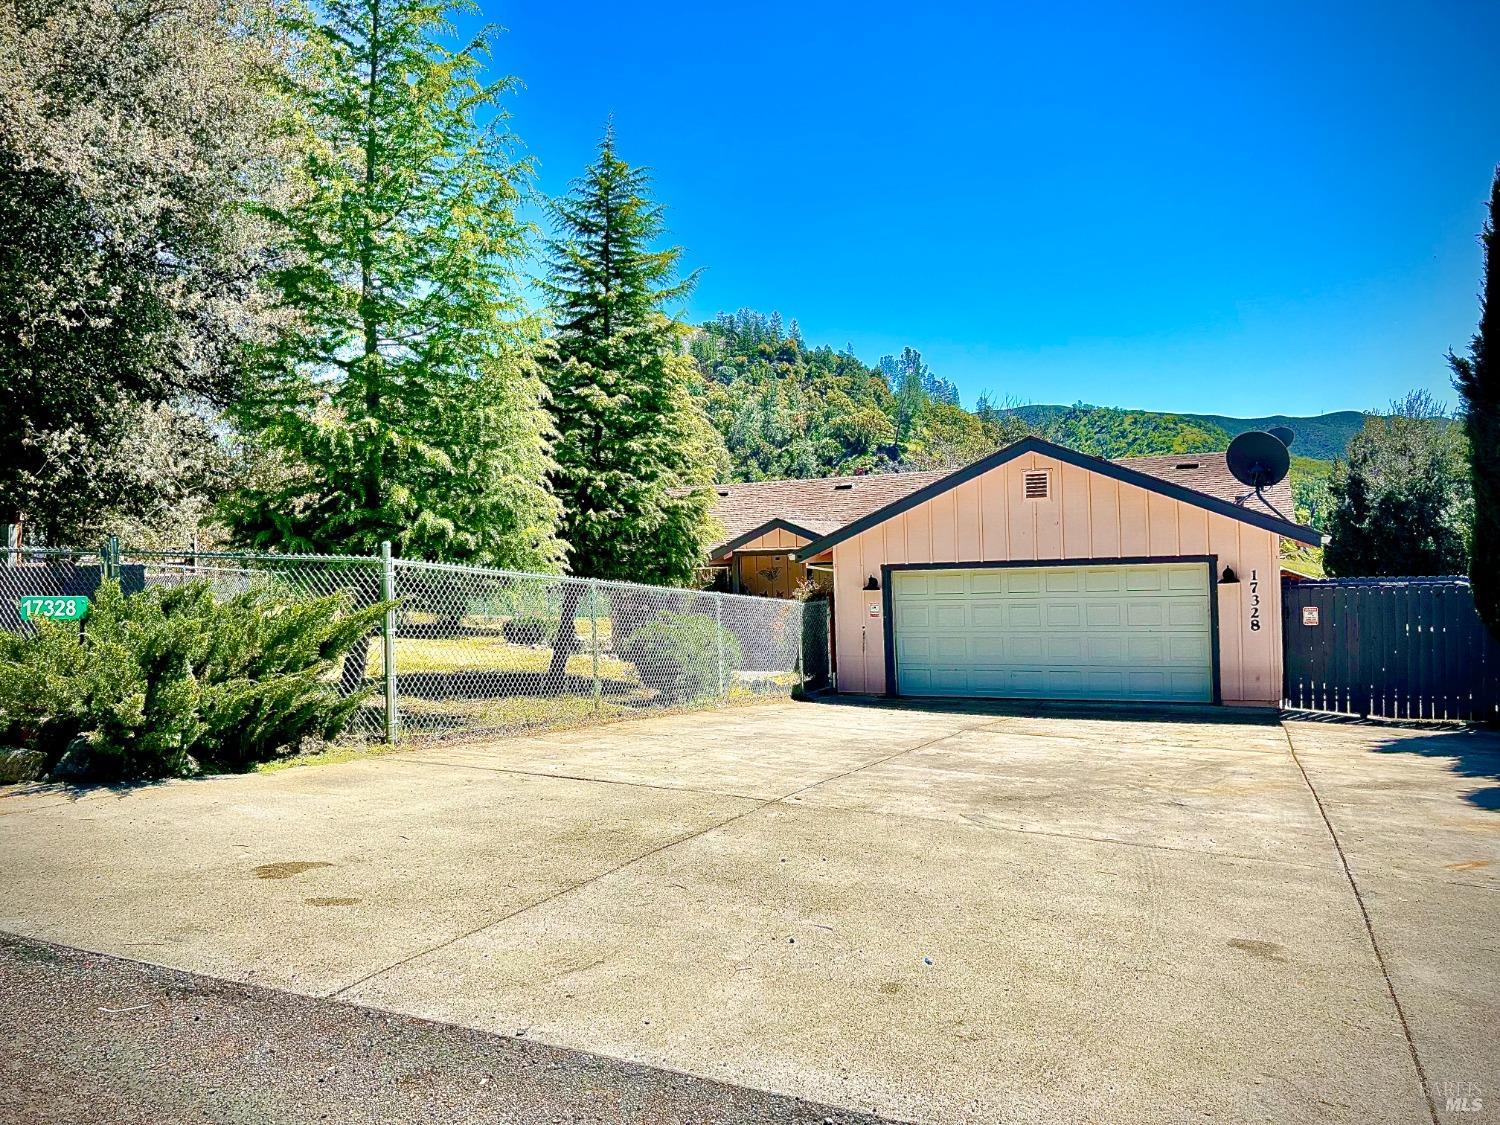 Photo of 17328 Cache Creek Rd in Clearlake Oaks, CA